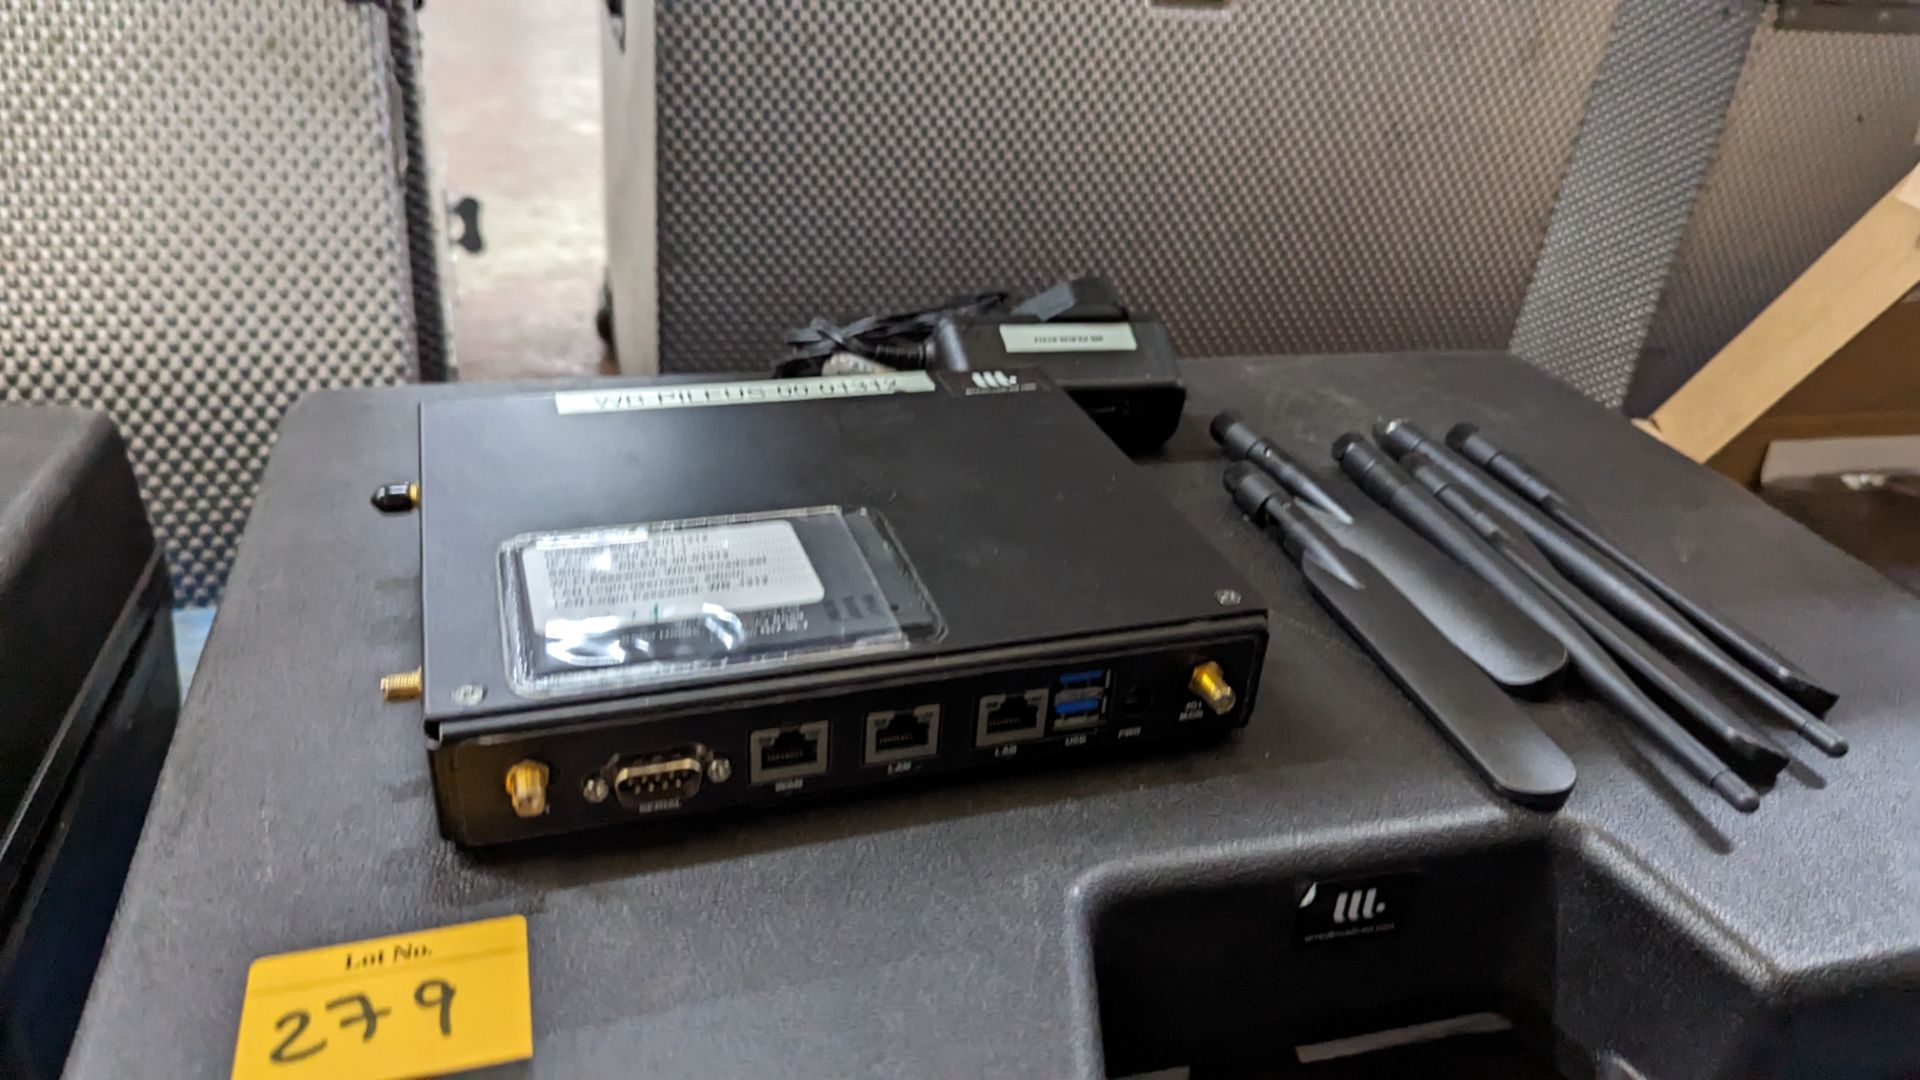 Celerway Pileous modem router, including case, aerials and other accessories - Image 3 of 7